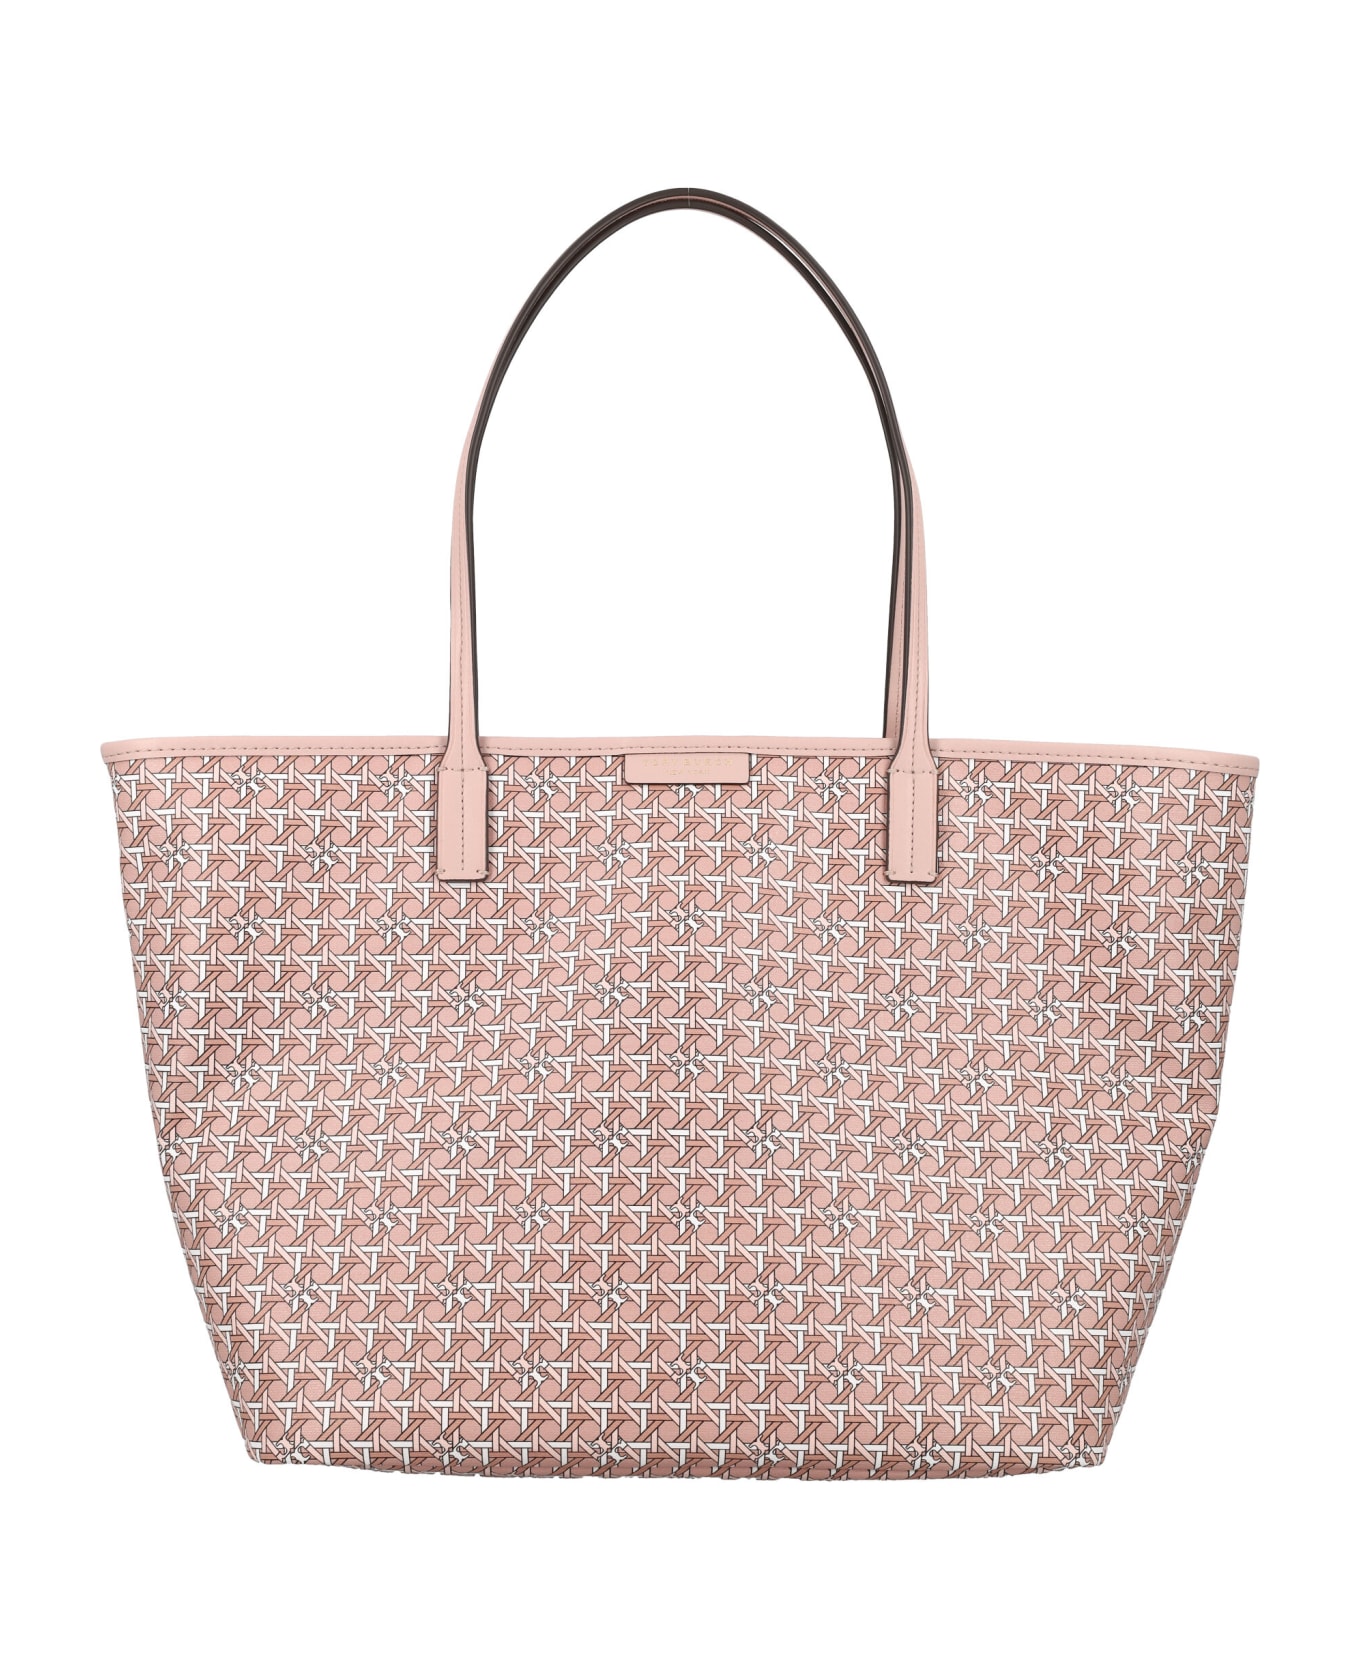 Tory Burch Ever-ready Tote - WINTER PEACH トートバッグ